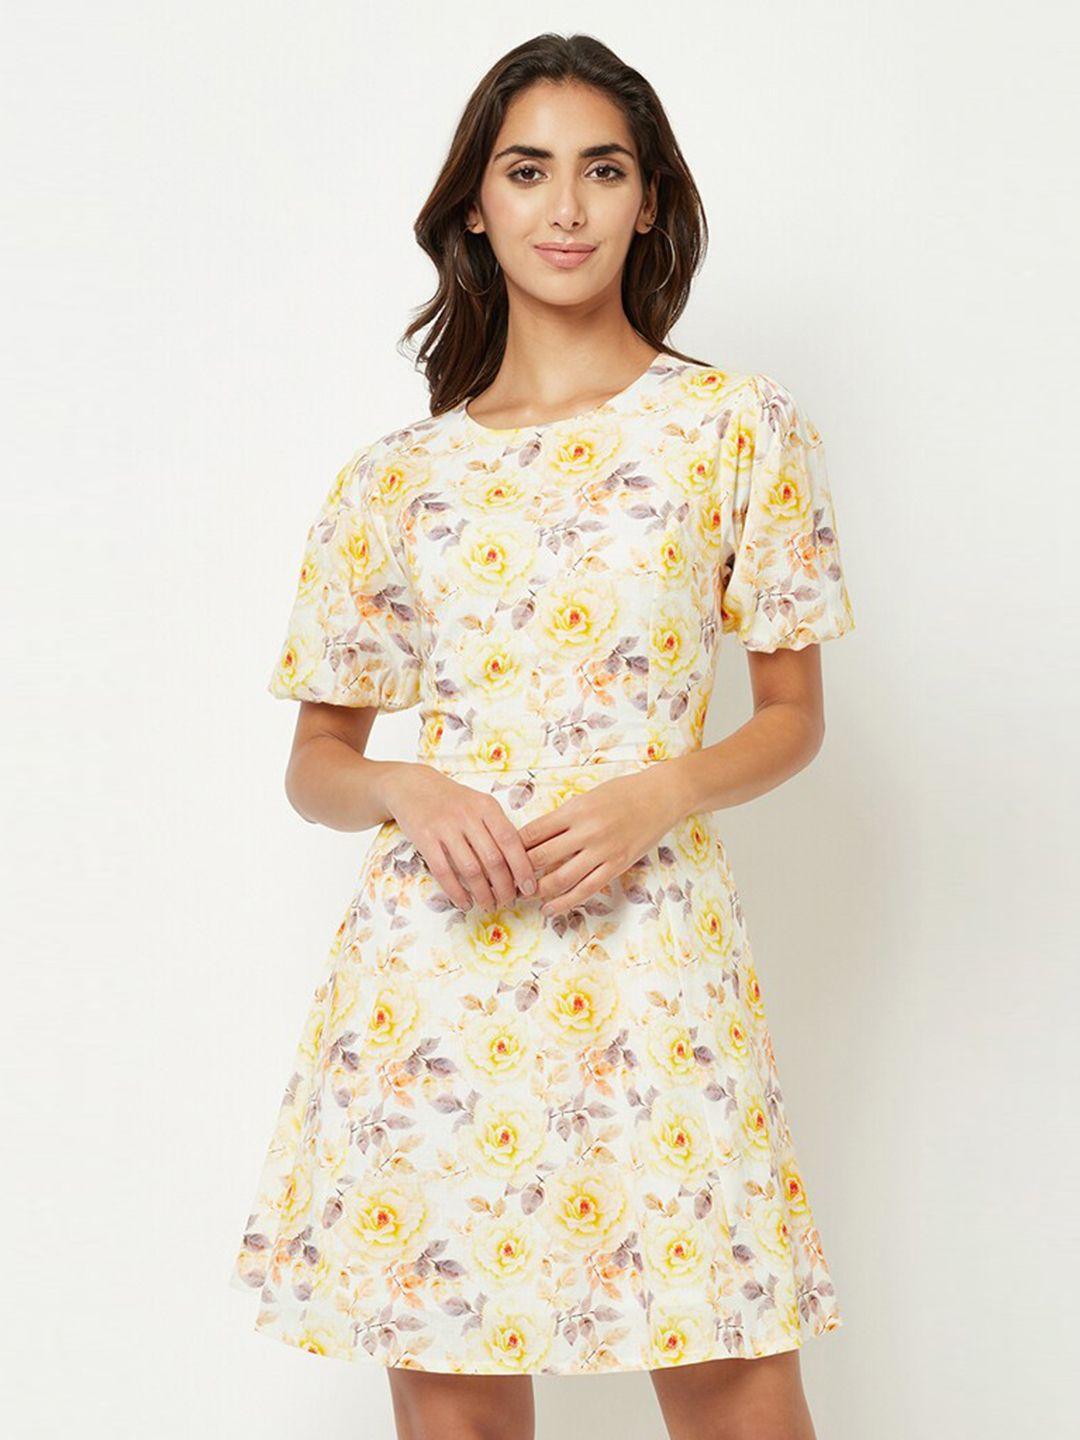 house of s white floral dress